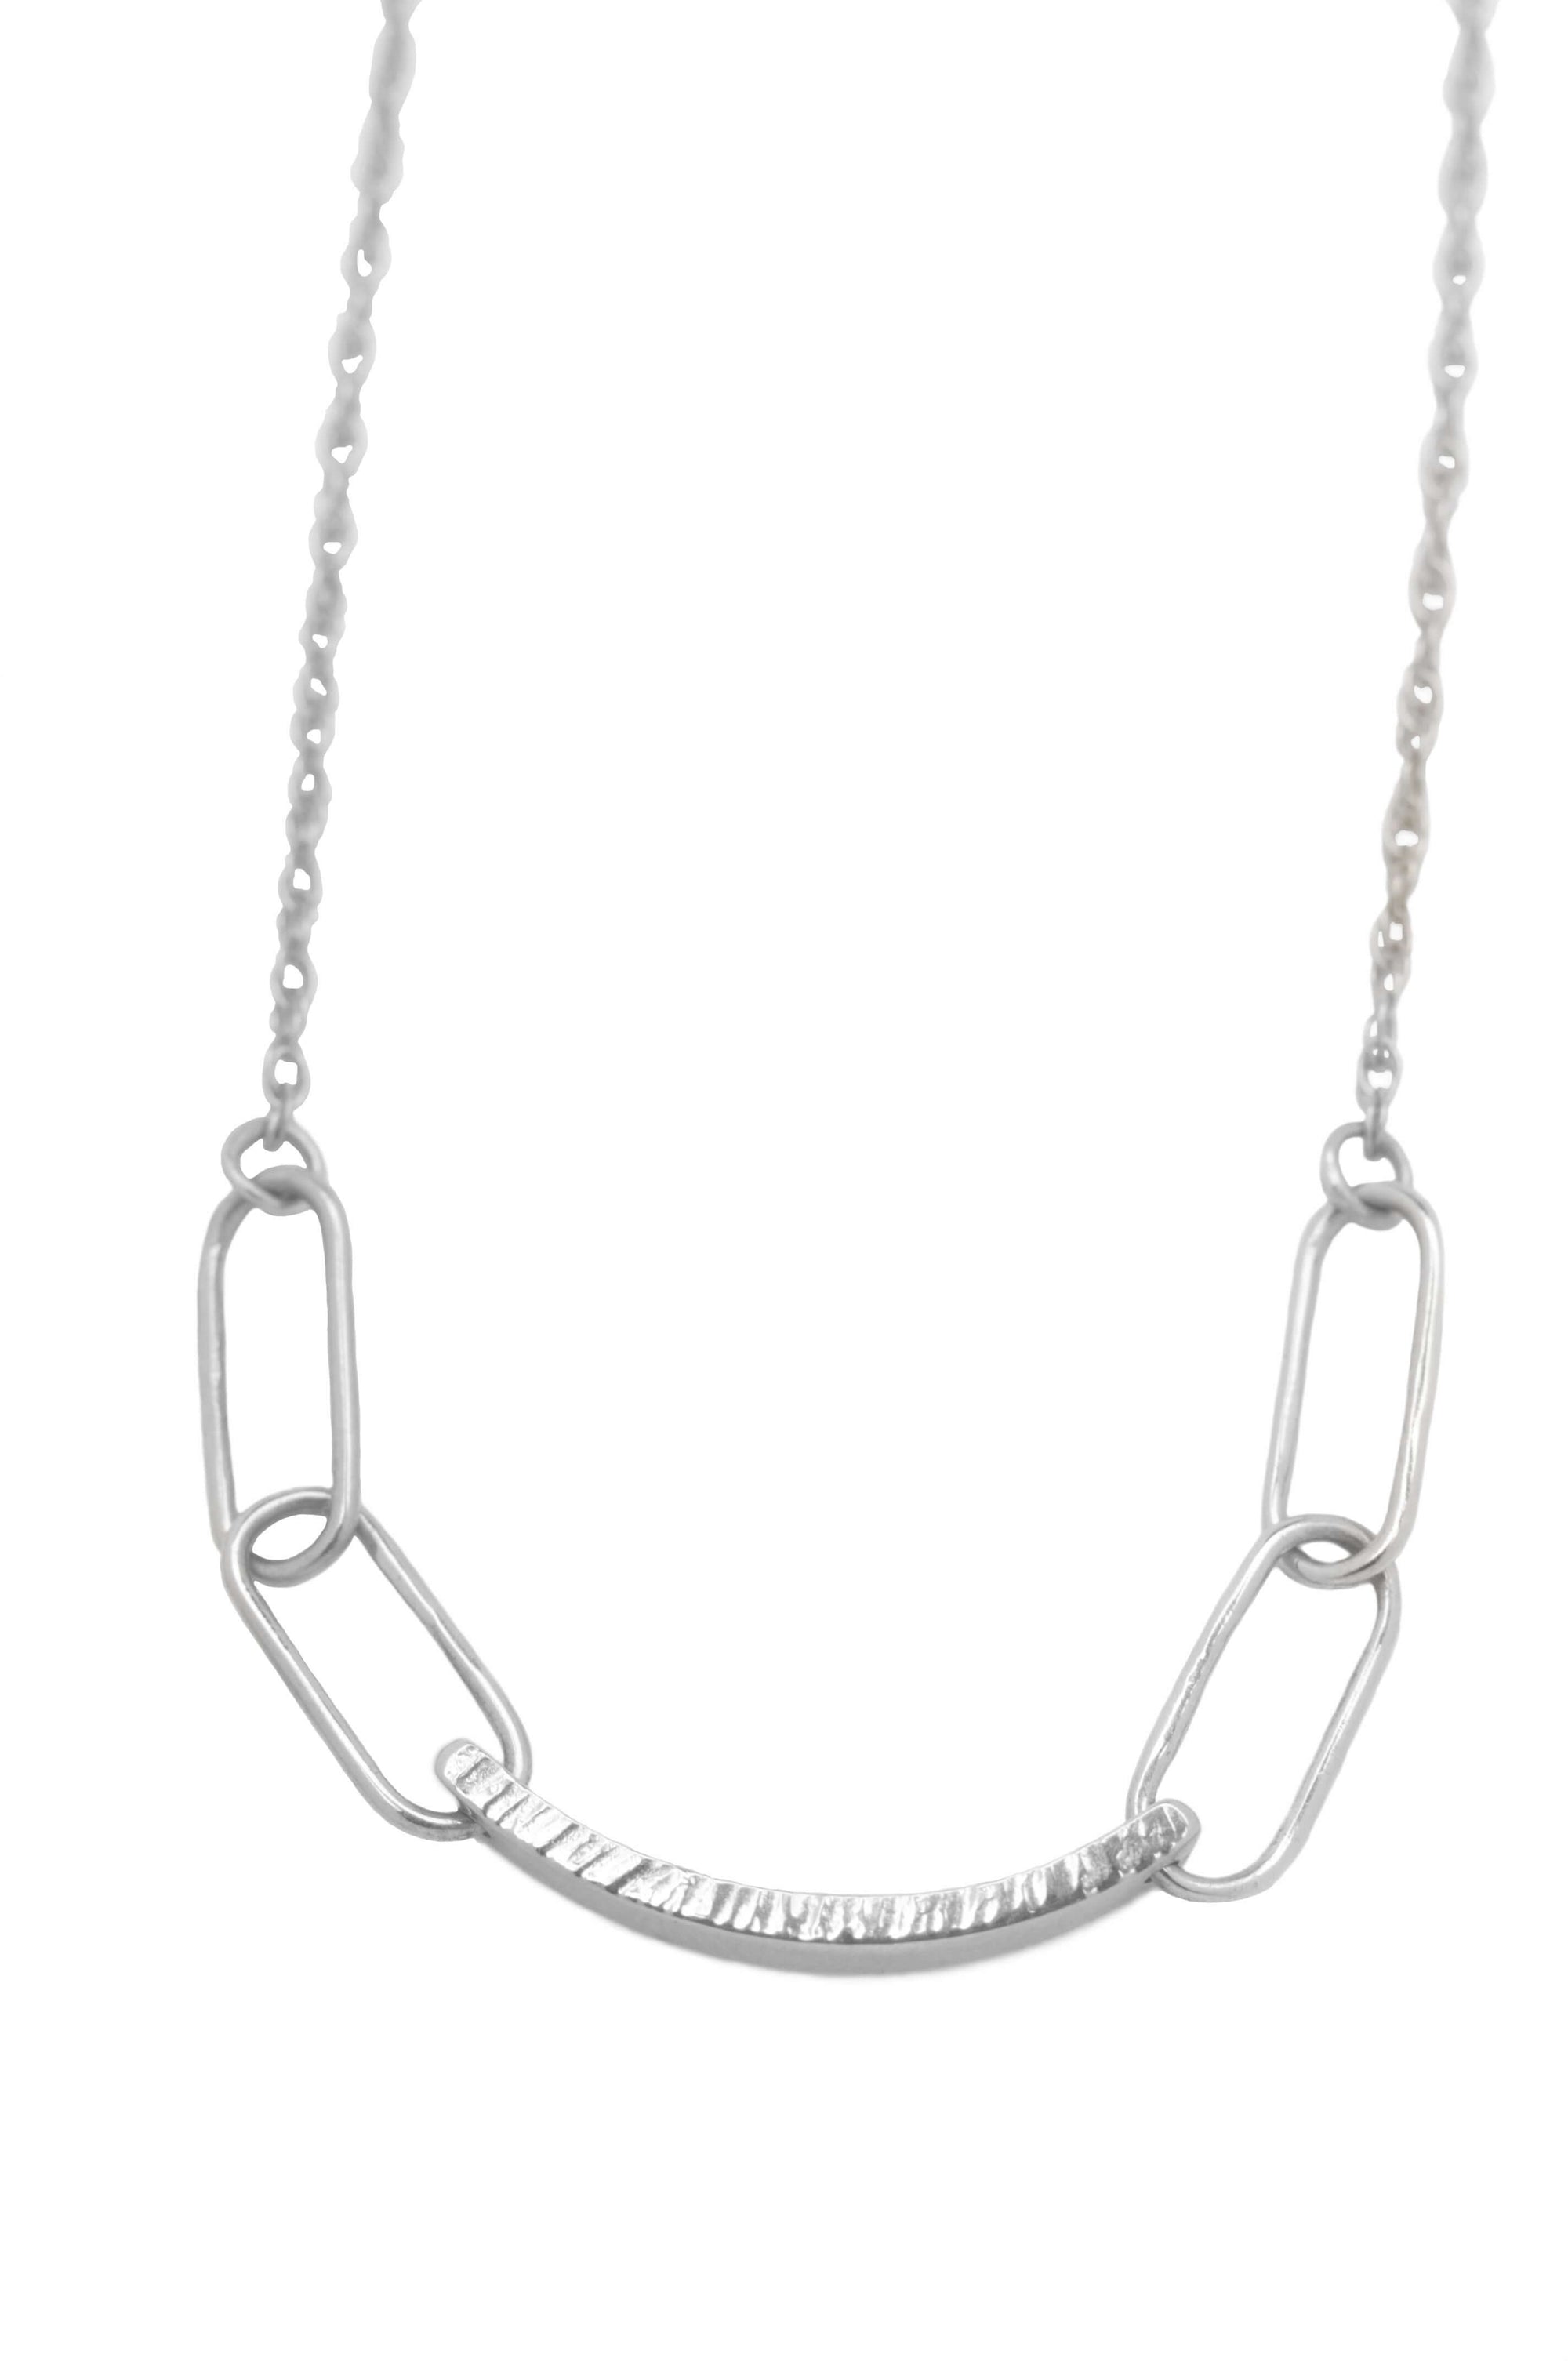 A sterling silver large link necklace